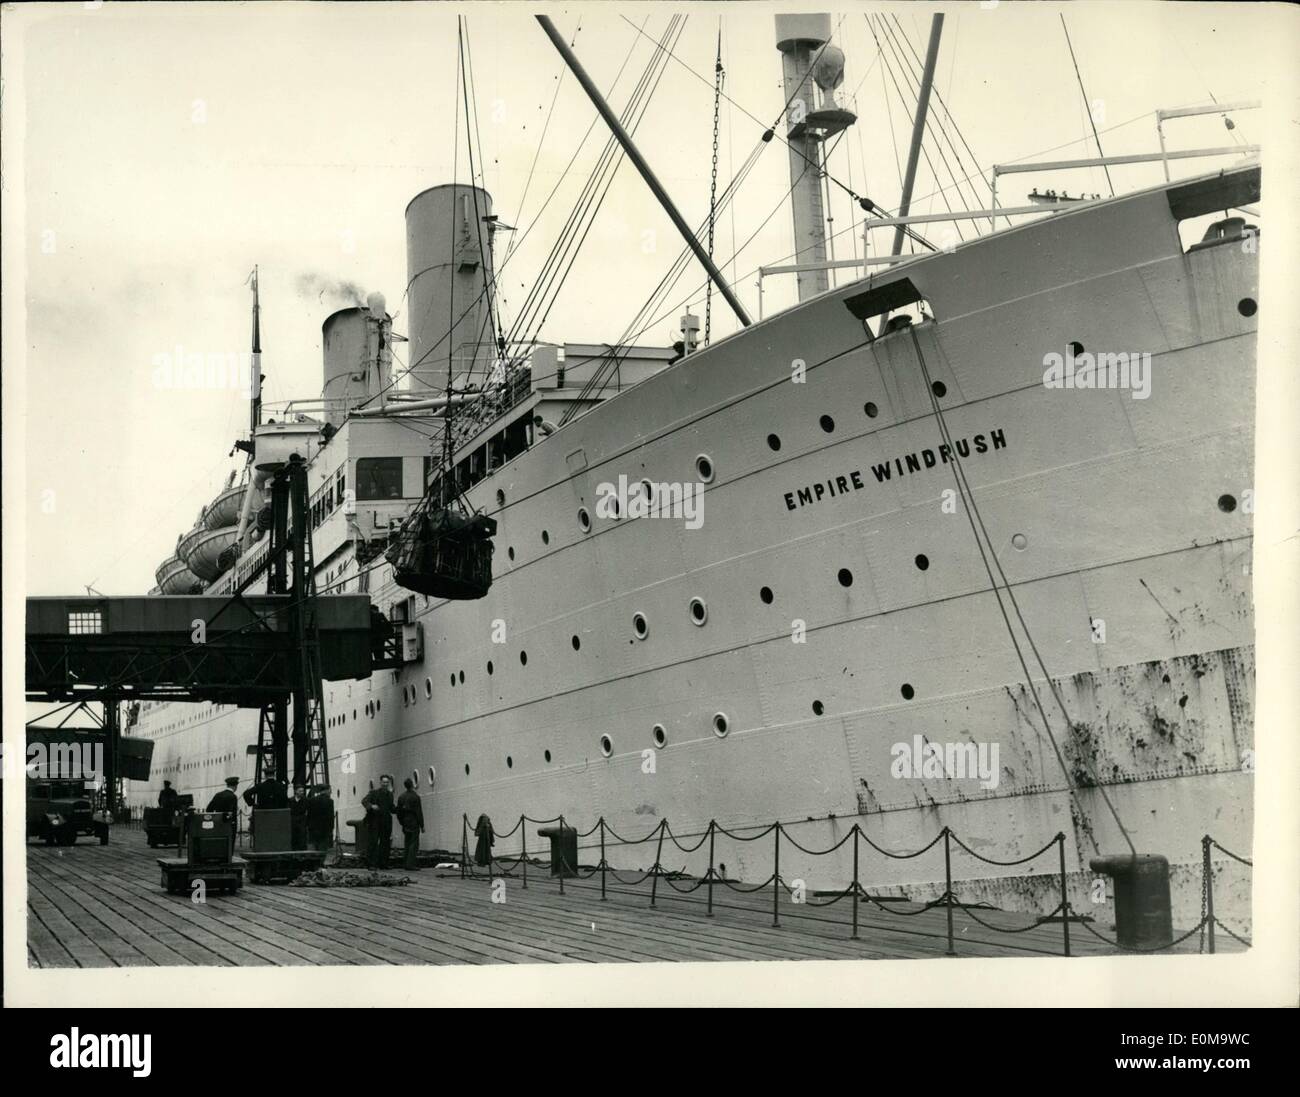 Mar. 03, 1954 - British vessel reported burned out in the Mediterranean. Keystone Photo Shows: View of the British vessel Empire Windrush which is reported to have been burned out in the Mediterranean. All aboard have been taken to the nearest port Algiers about thirty miles away. Stock Photo